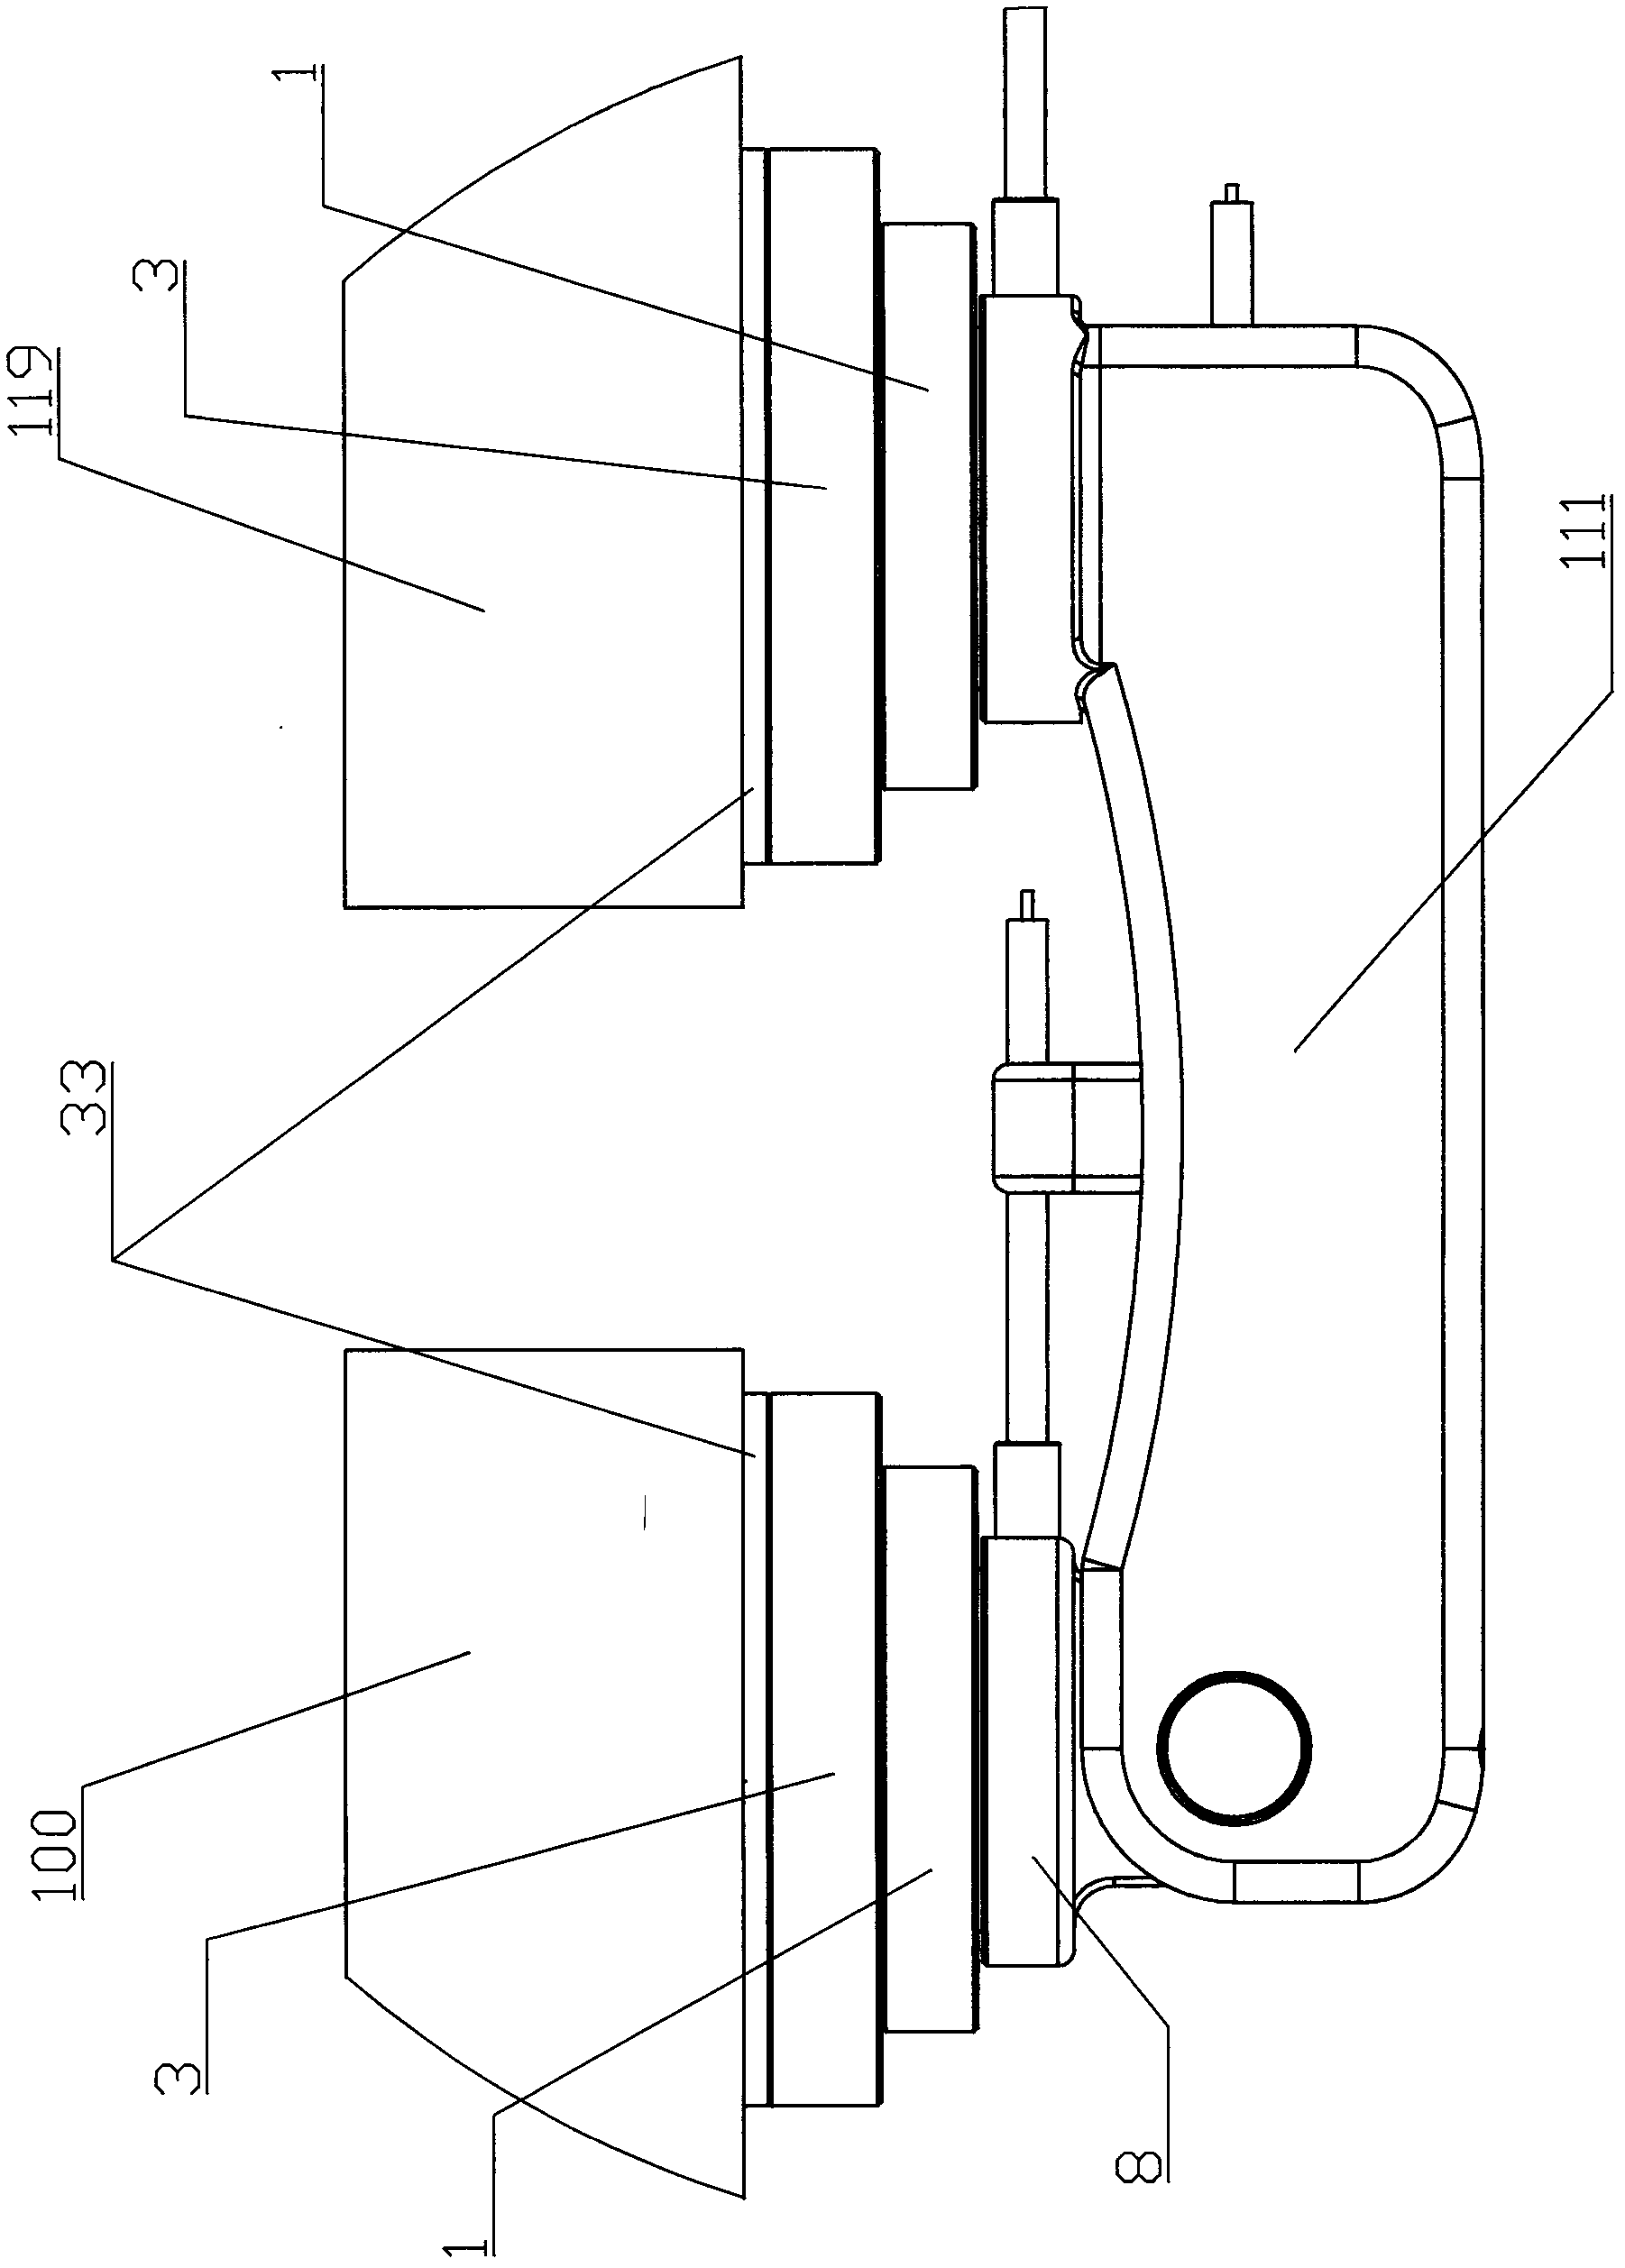 Foot pedal structure for medical operating table